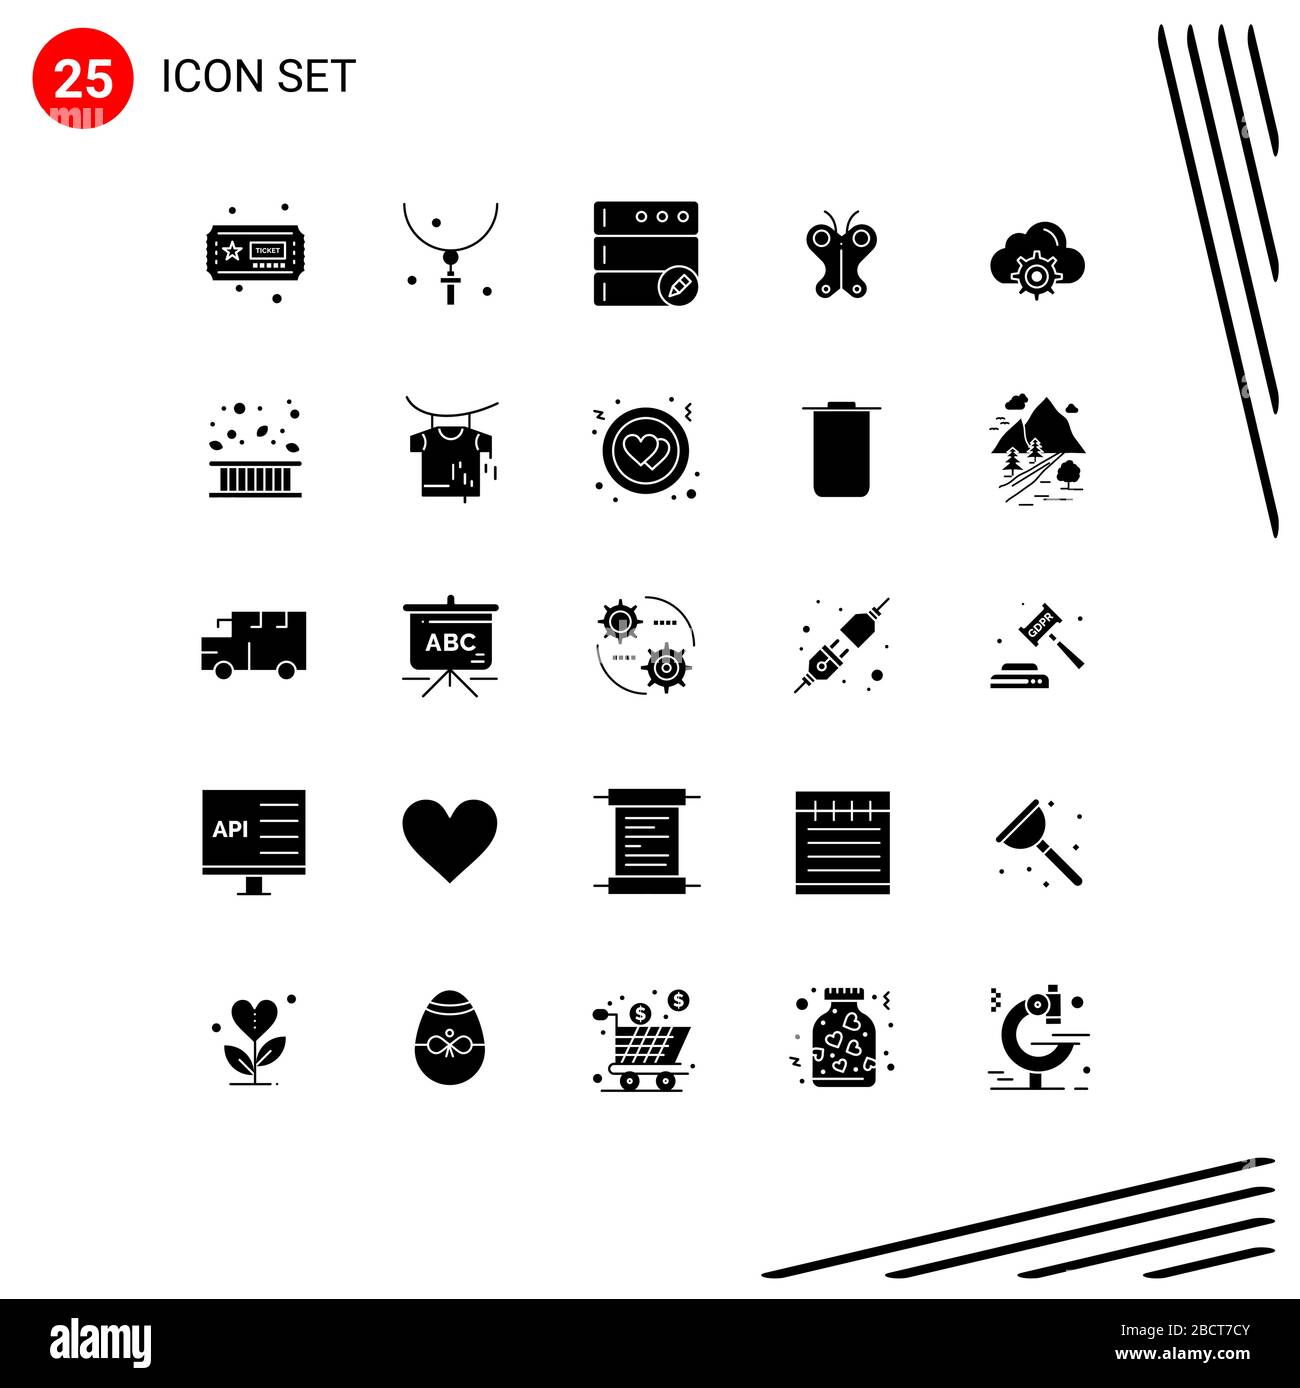 Pictogram Set of 25 Simple Solid Glyphs of gear, cloud, database, nature, butterfly Editable Vector Design Elements Stock Vector